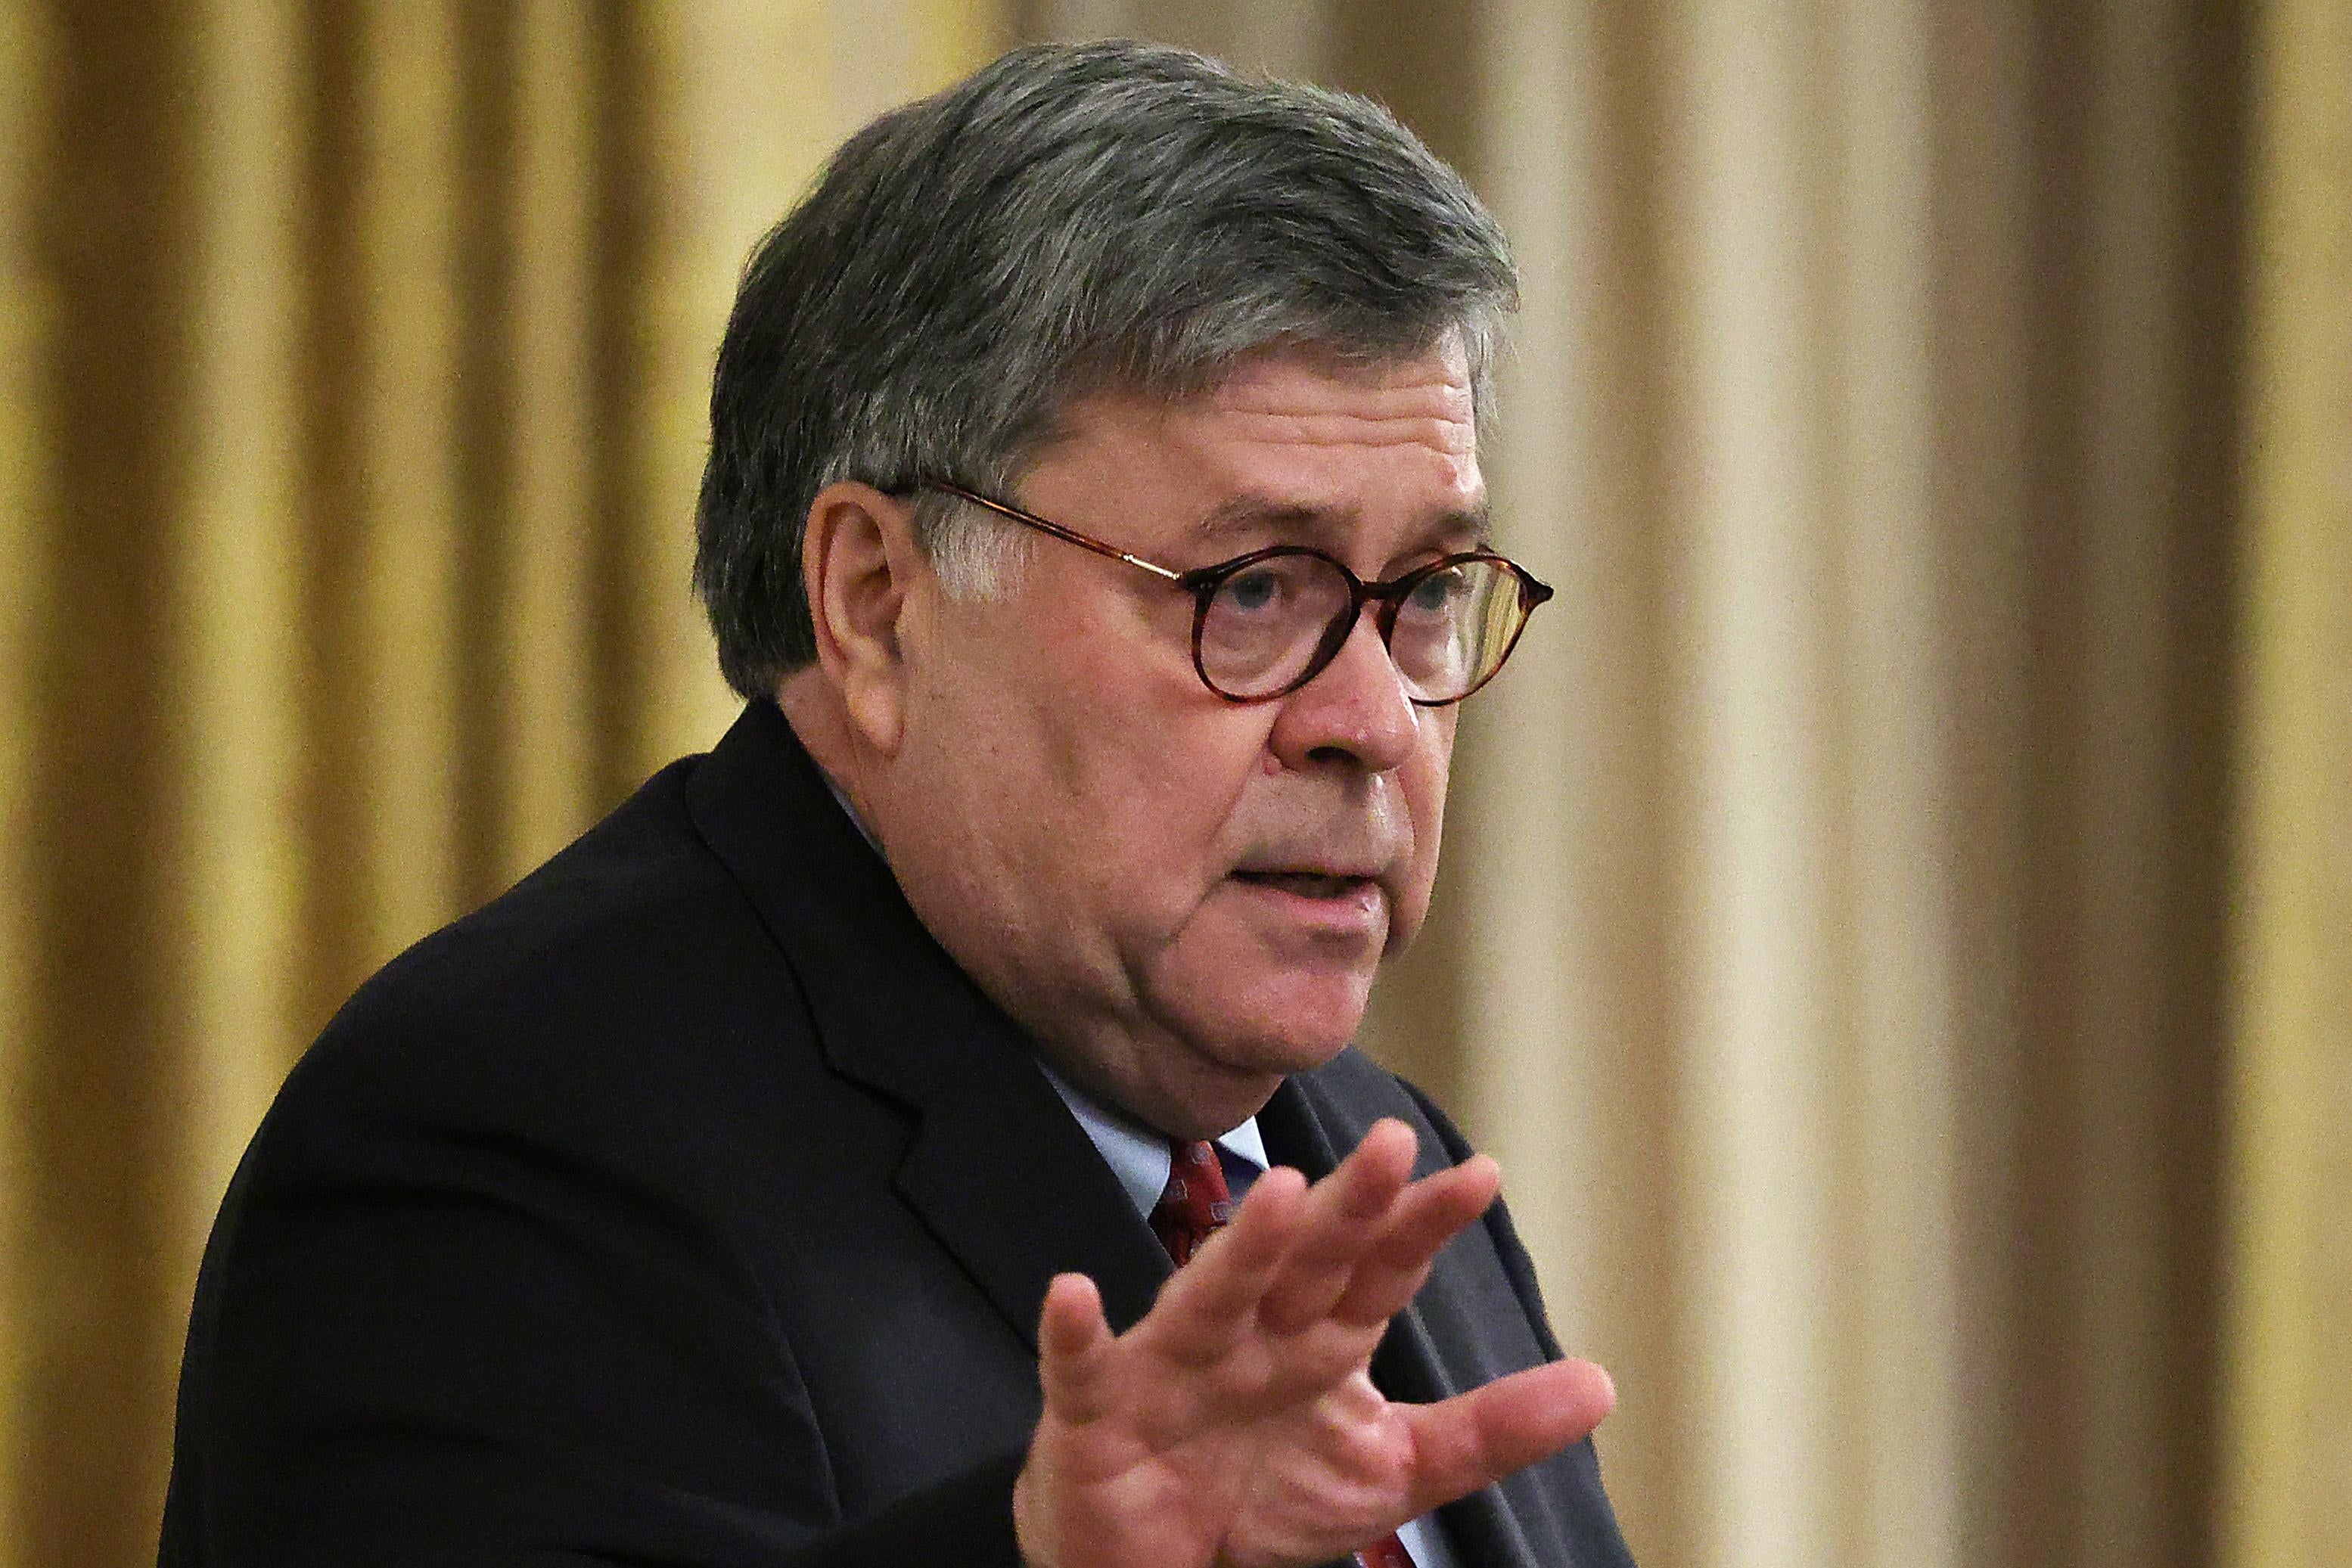 Barr, with outstretched arm, says something, probably misleading.